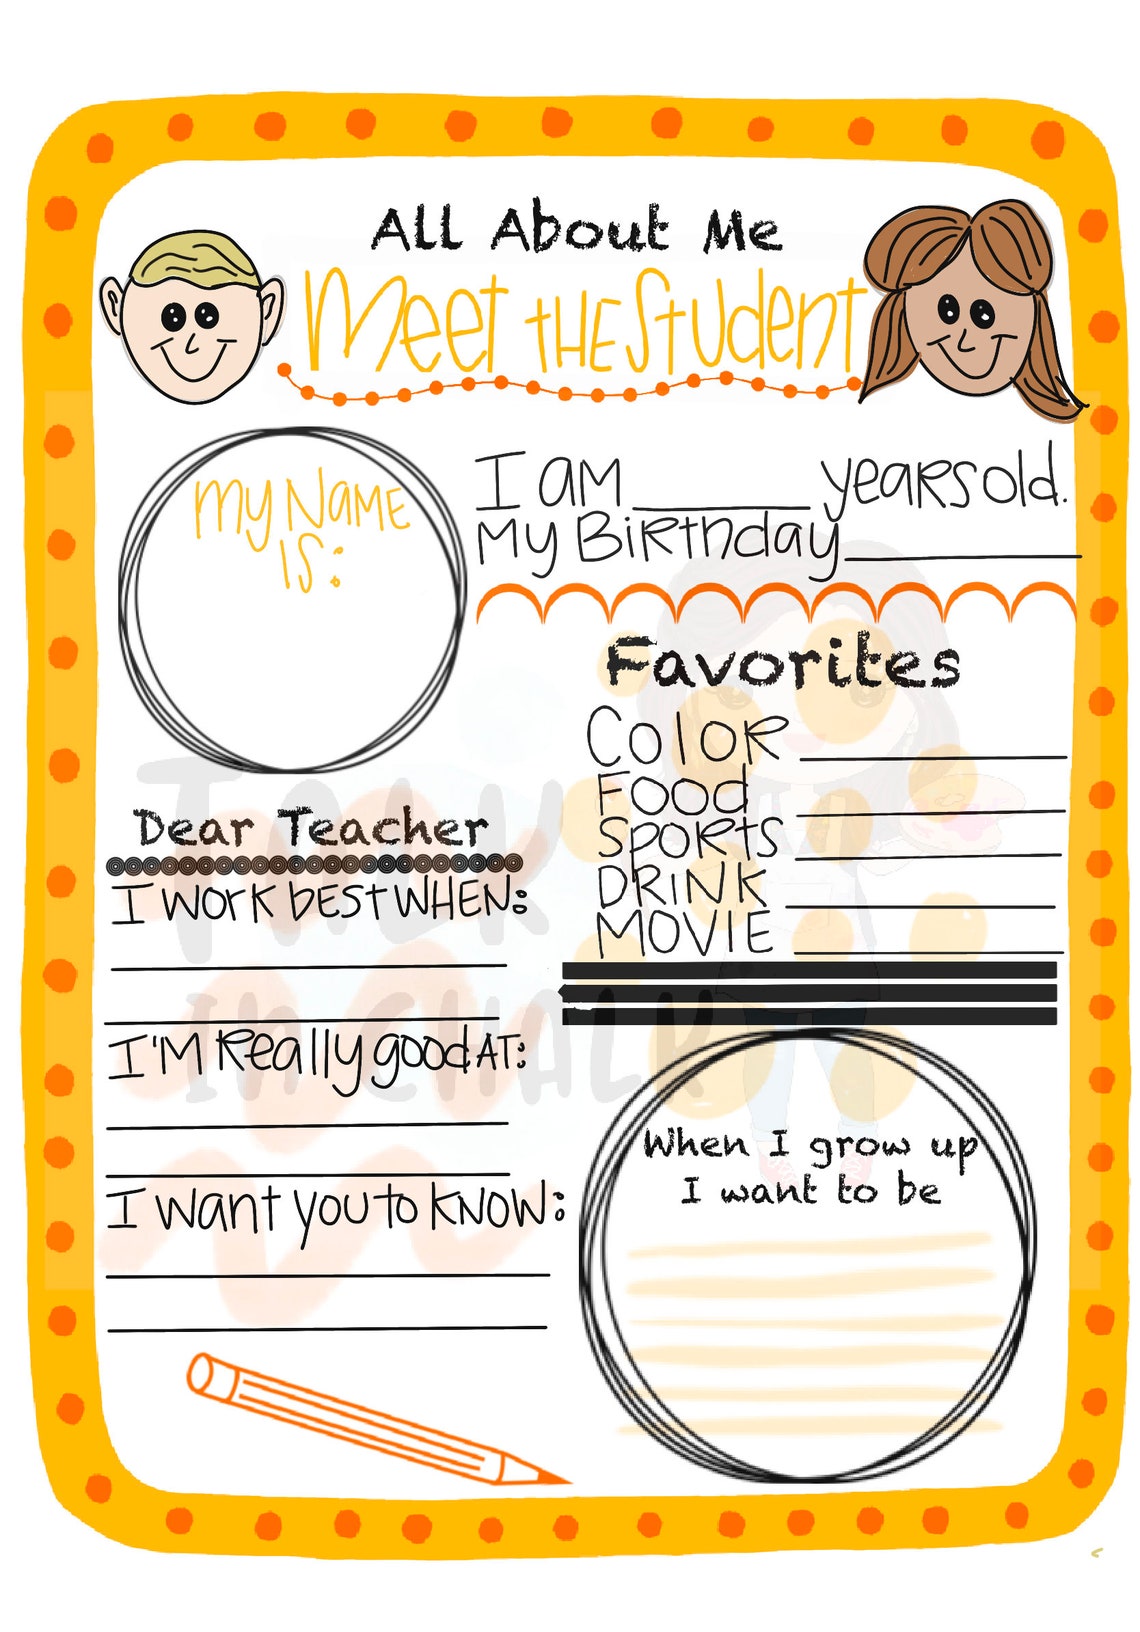 all-about-me-meet-the-student-printable-etsy